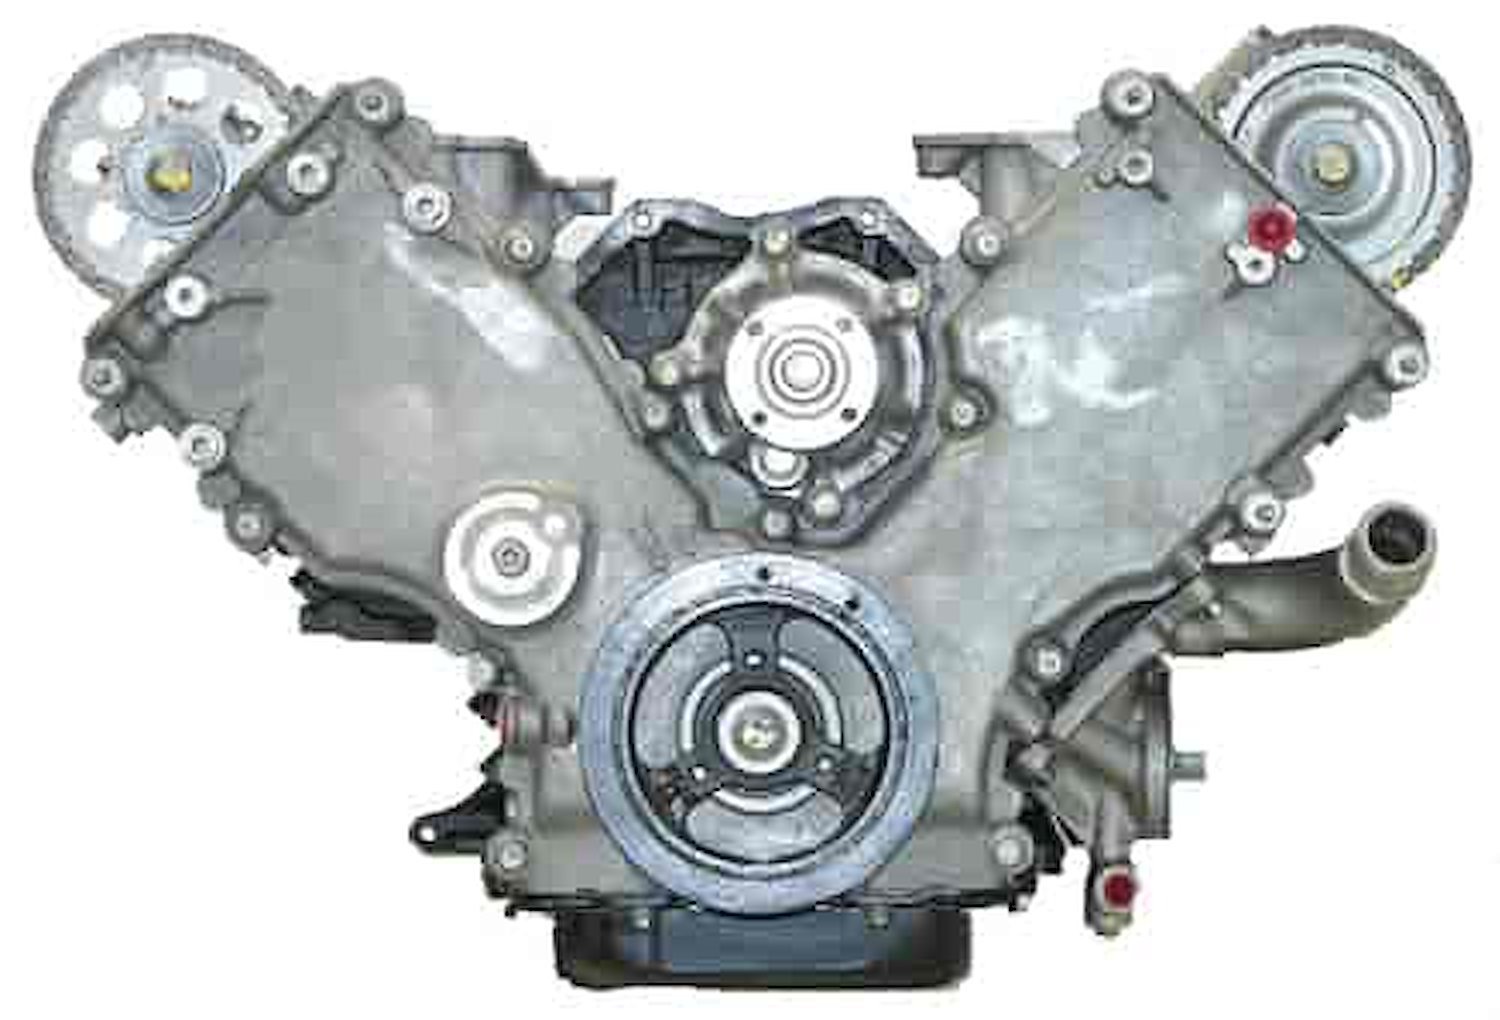 Remanufactured Crate Engine for 2000 Ford/Lincoln/Mercury Car